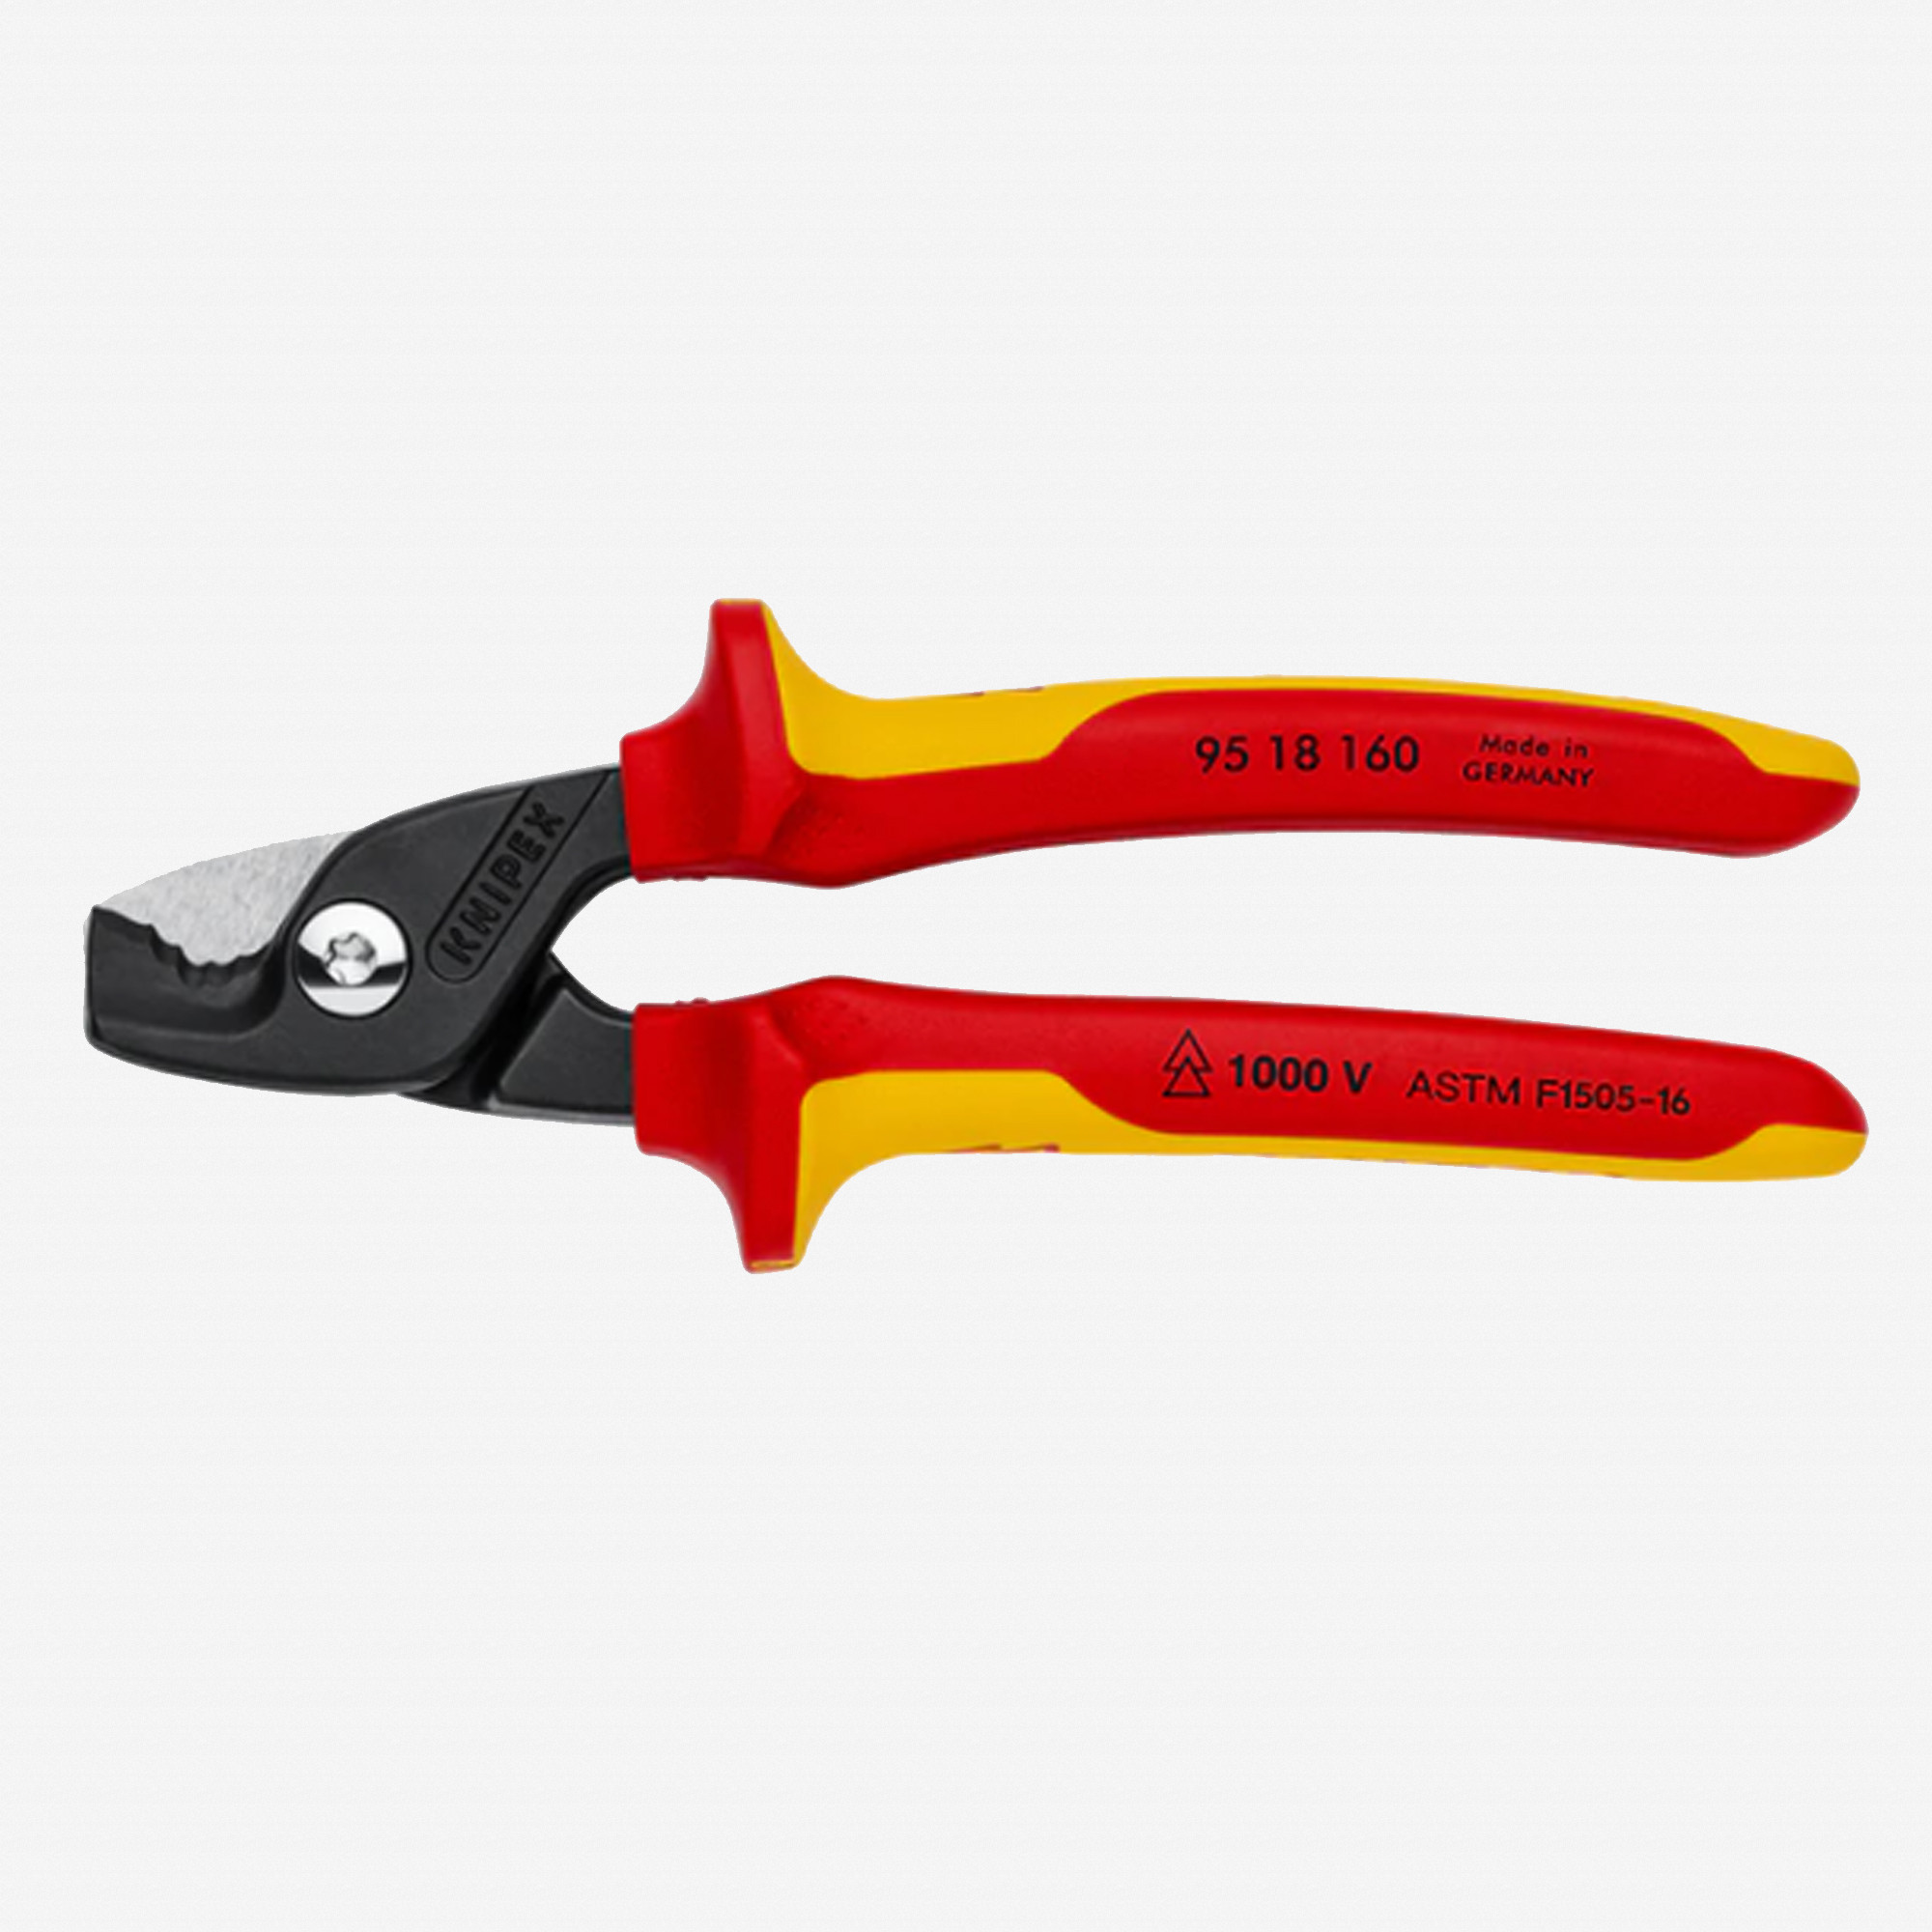 End cutting plier for hard wire comfort grips 150 mm - Maun